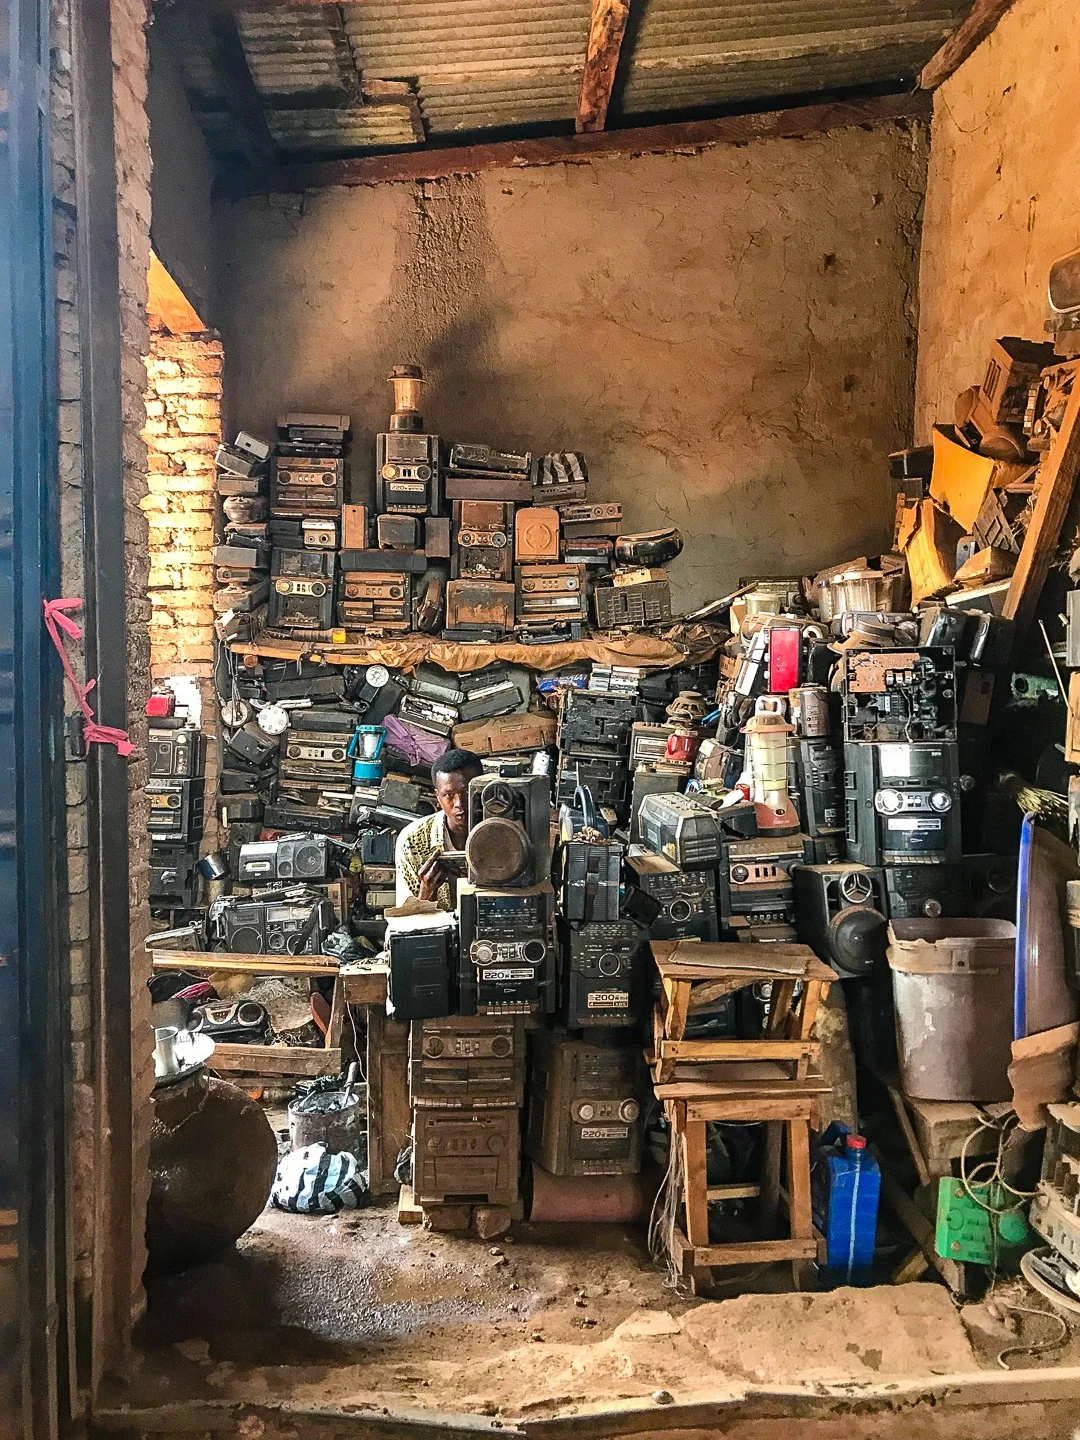 An electronics stall in the market in South Sudan.